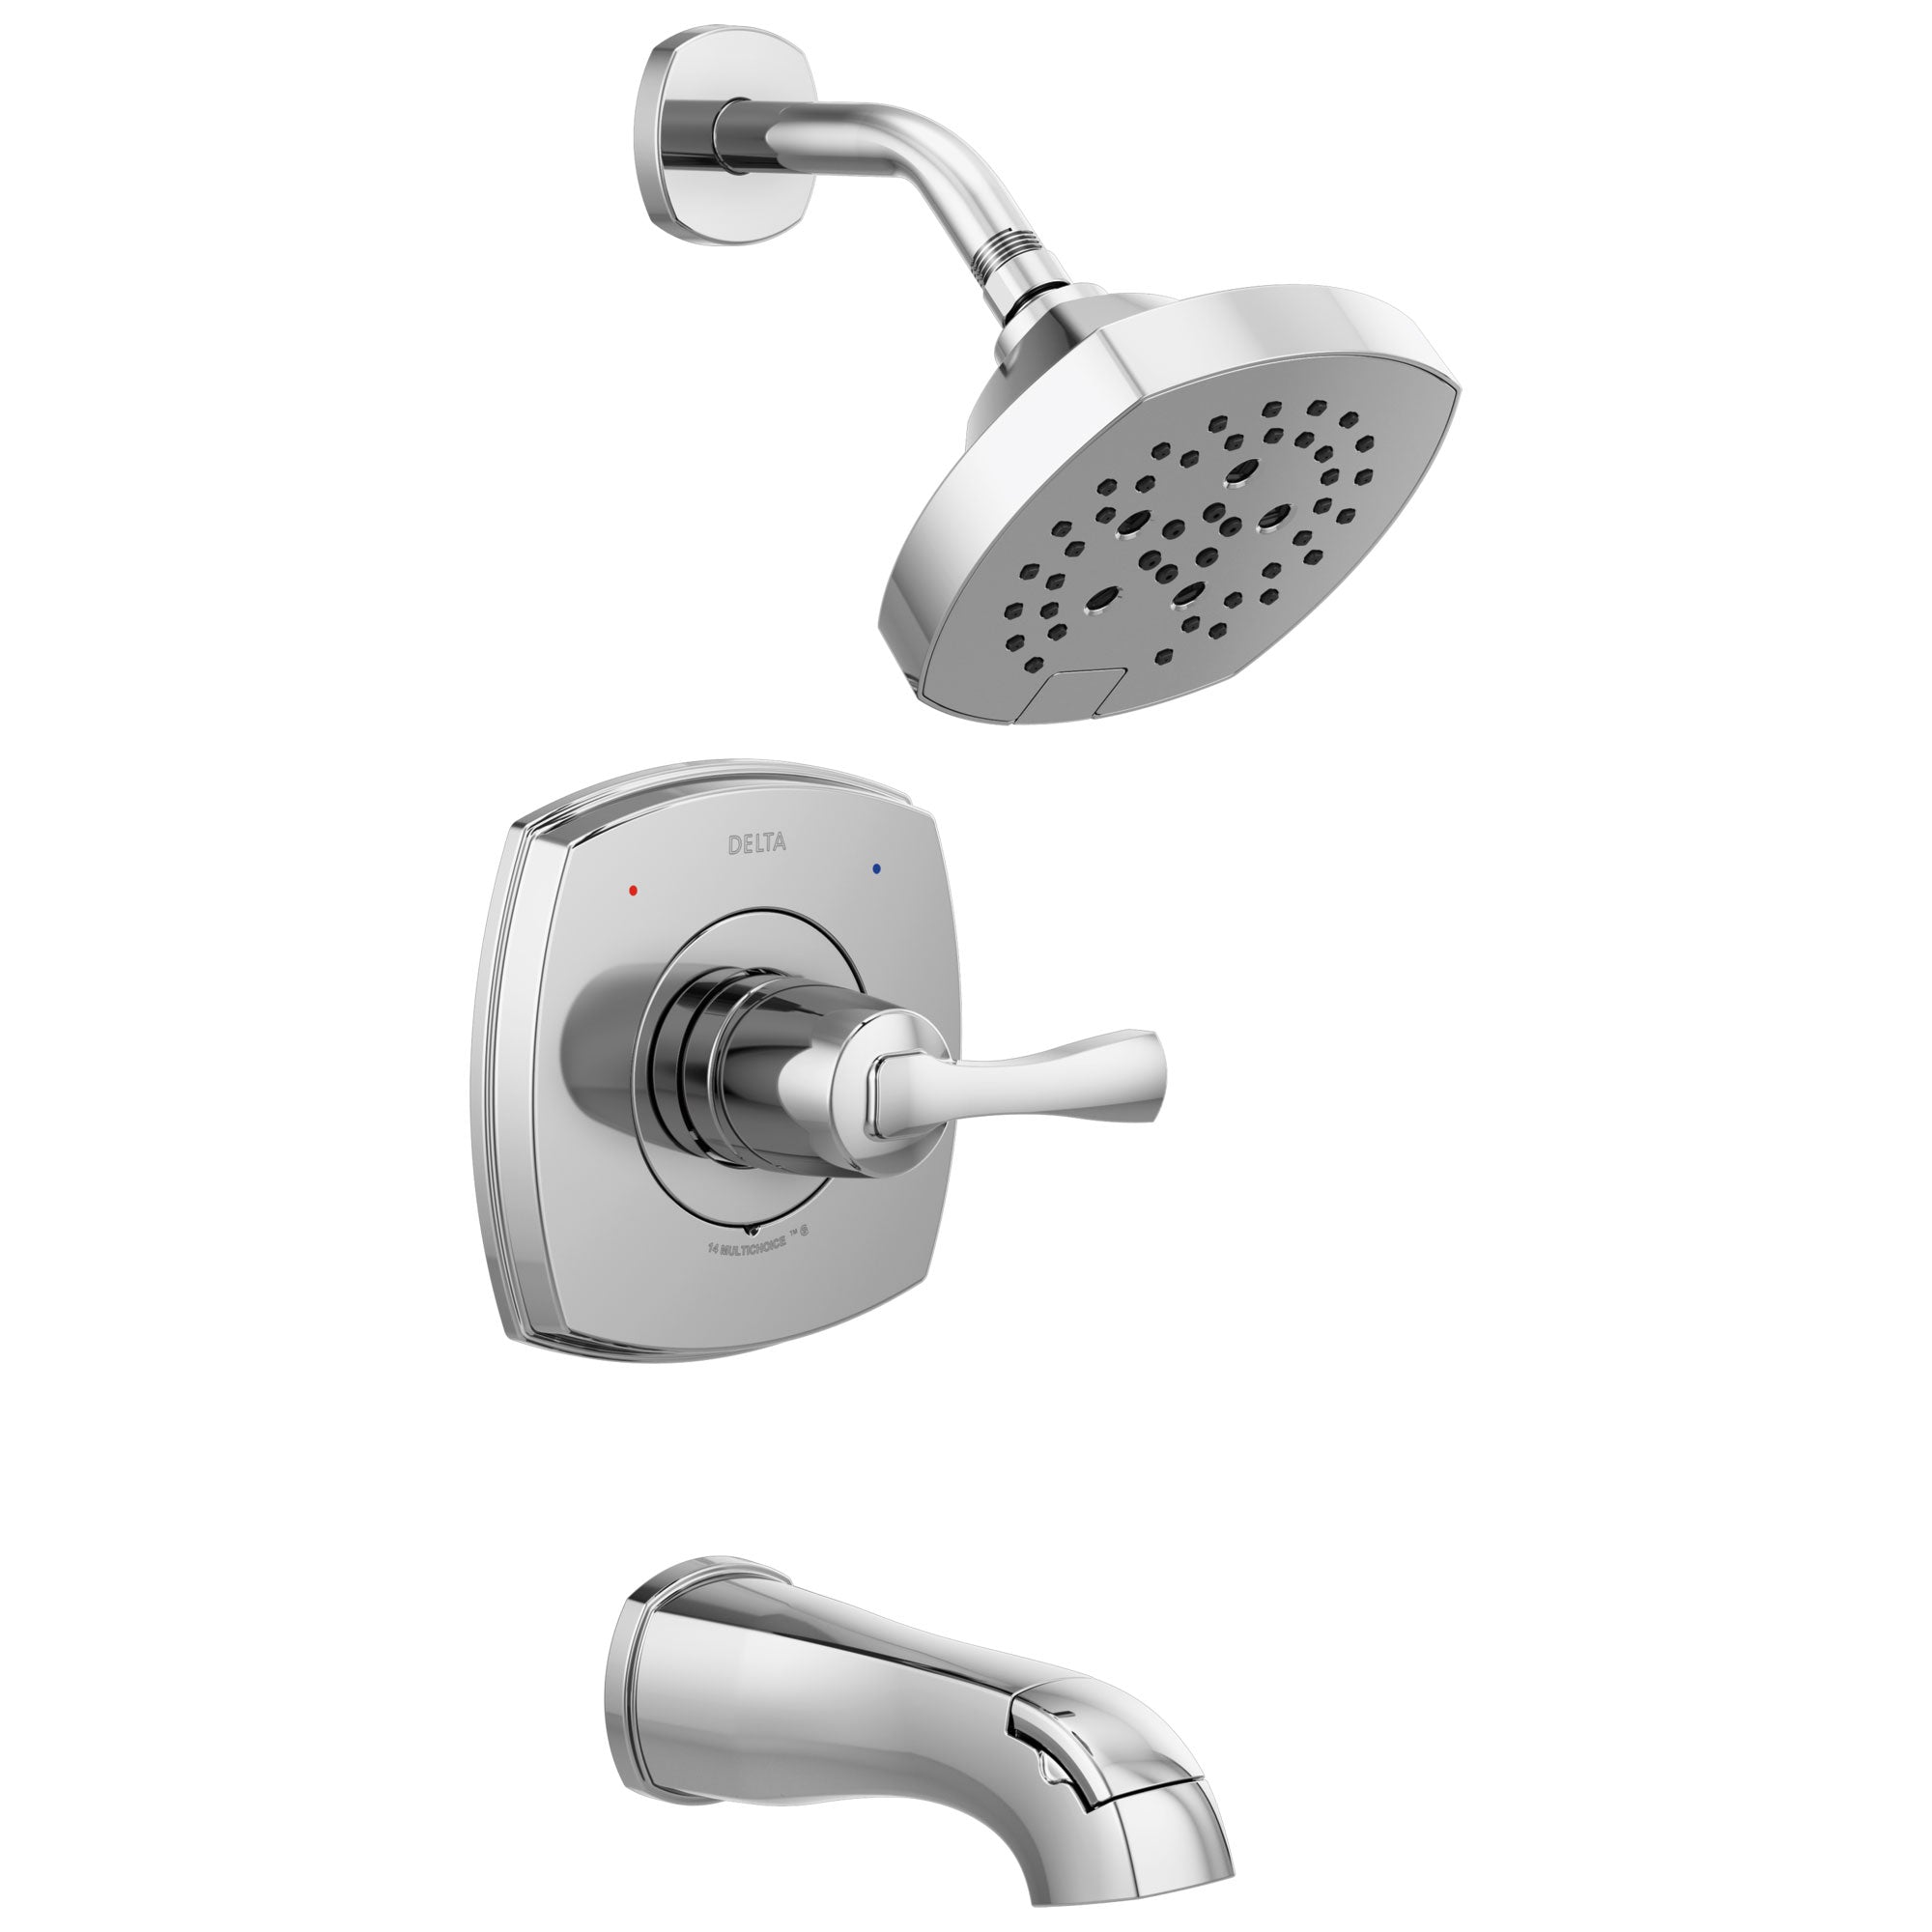 Delta Stryke Chrome Finish 14 Series Tub and Shower Combination Faucet Includes Single Lever Handle, Cartridge, and Valve with Stops D3444V